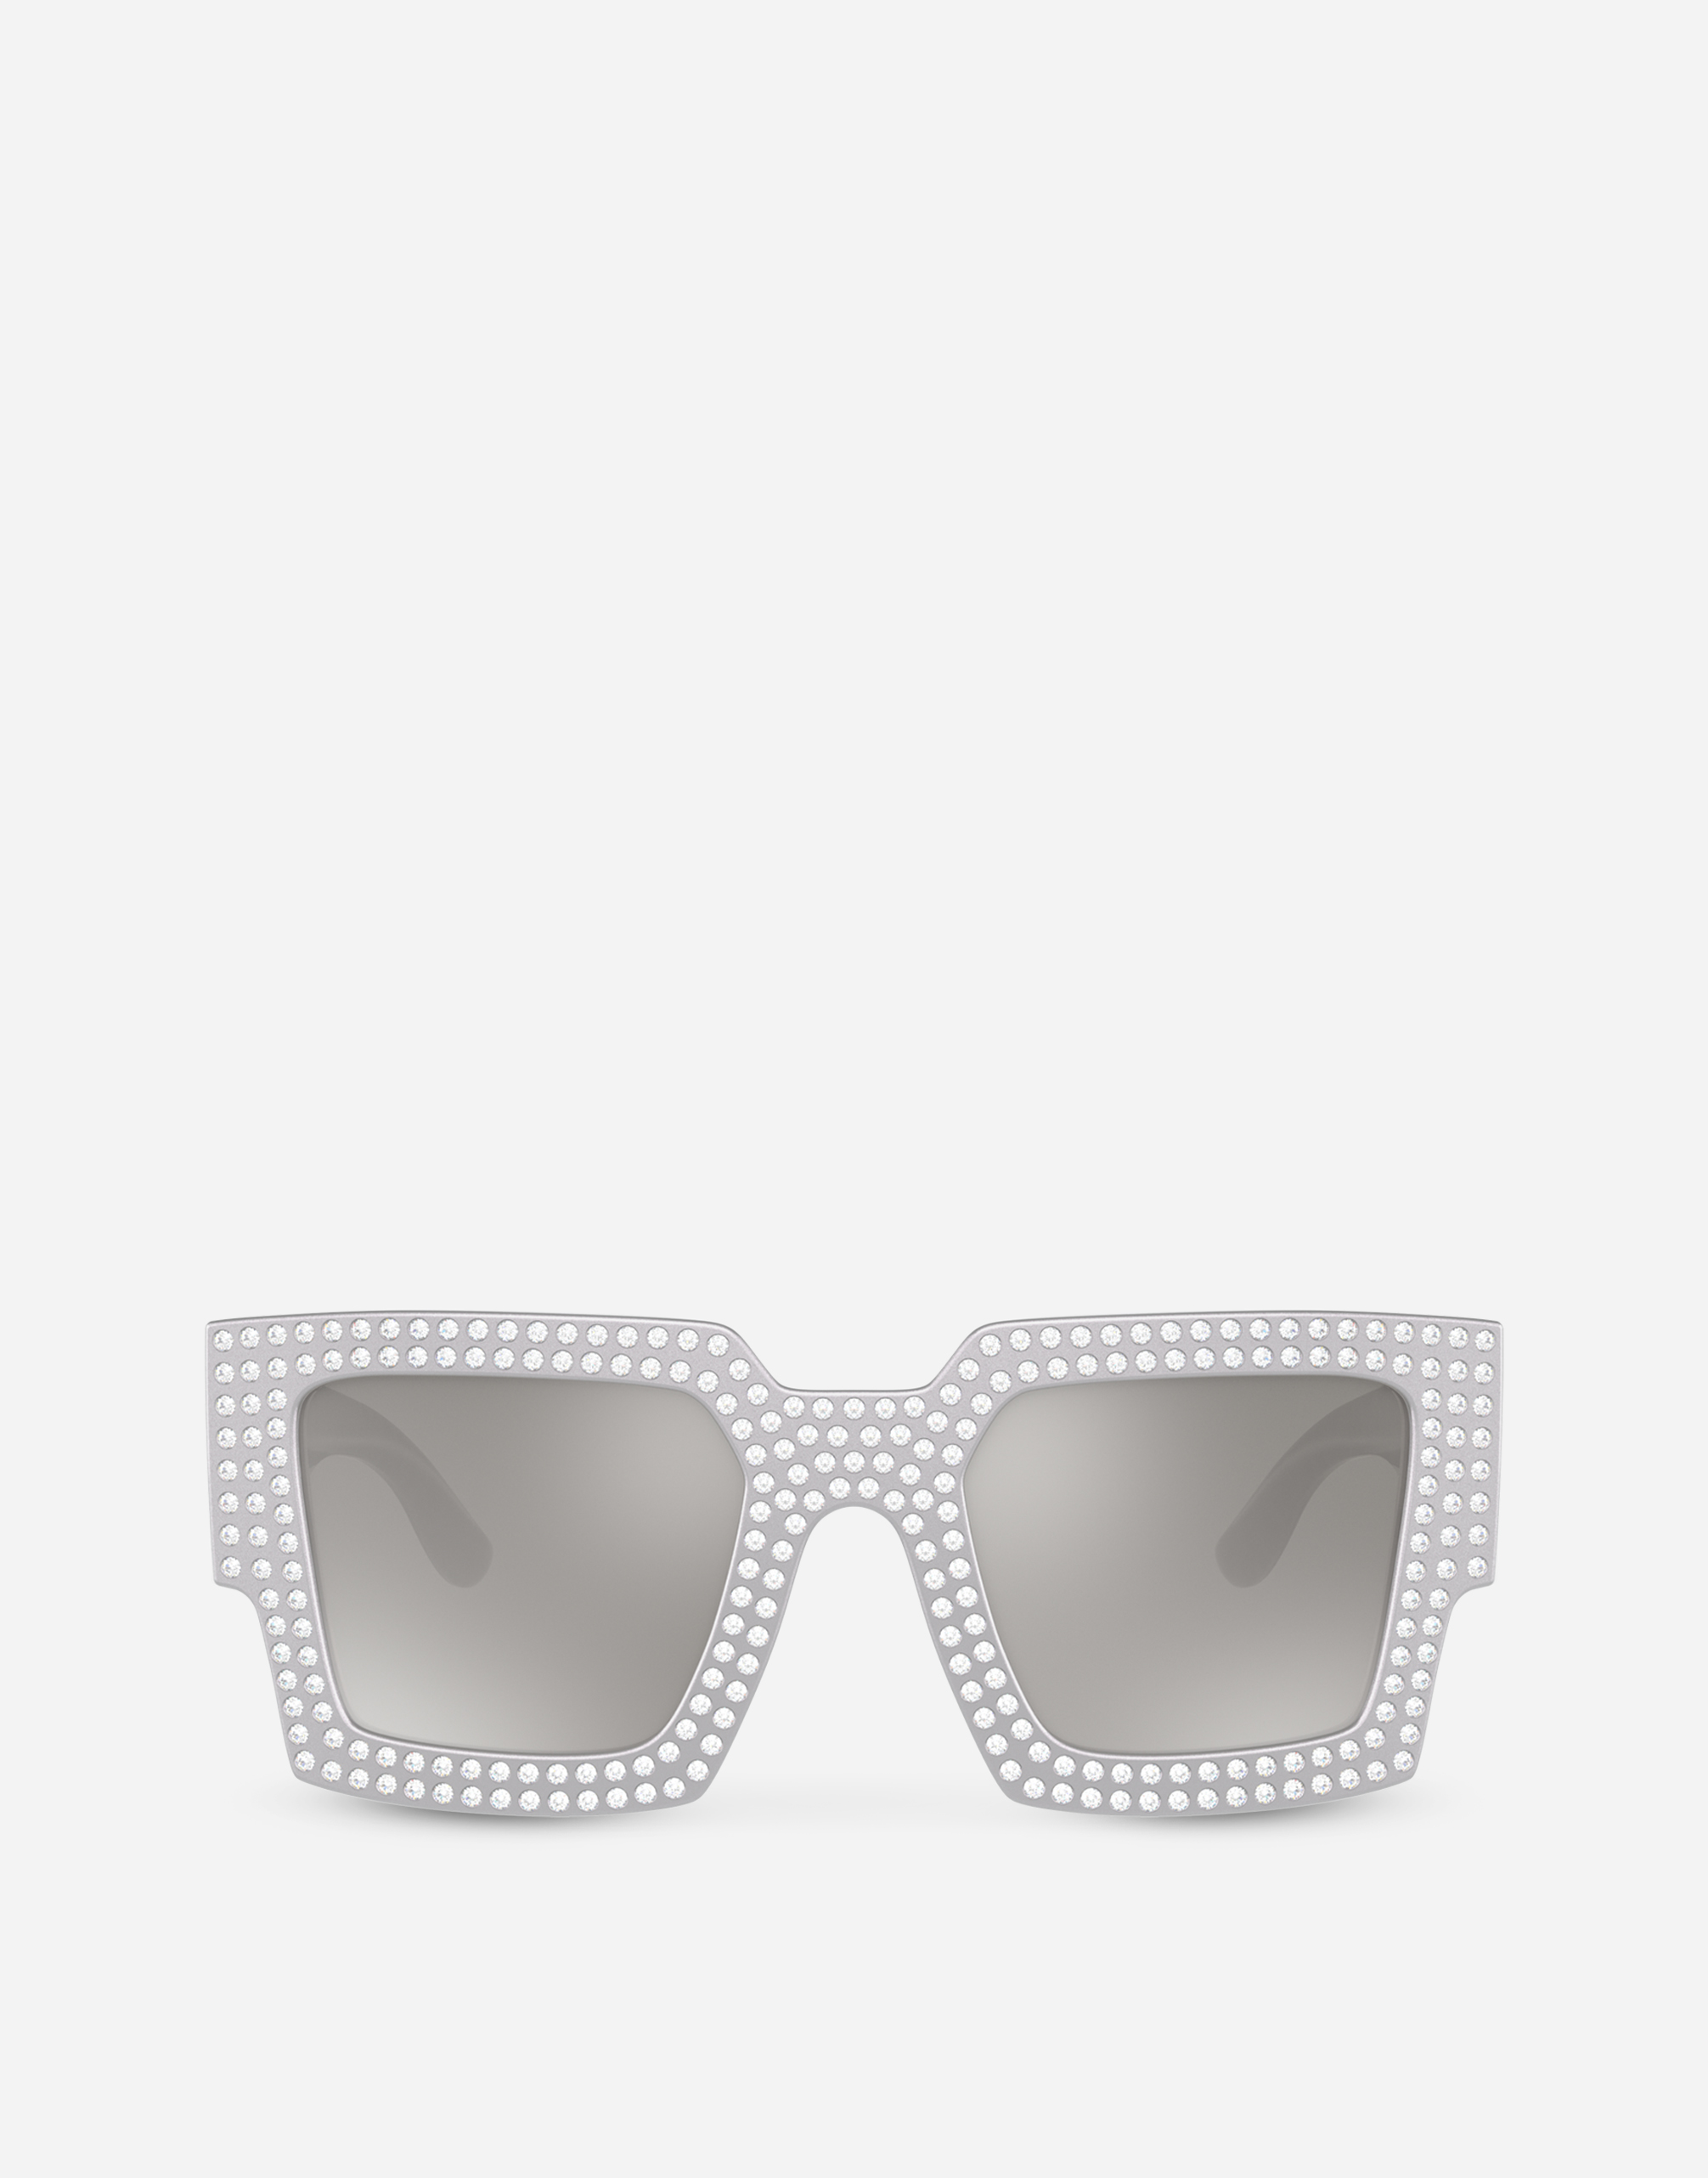 Zebra Sunglasses in Grey with crystals